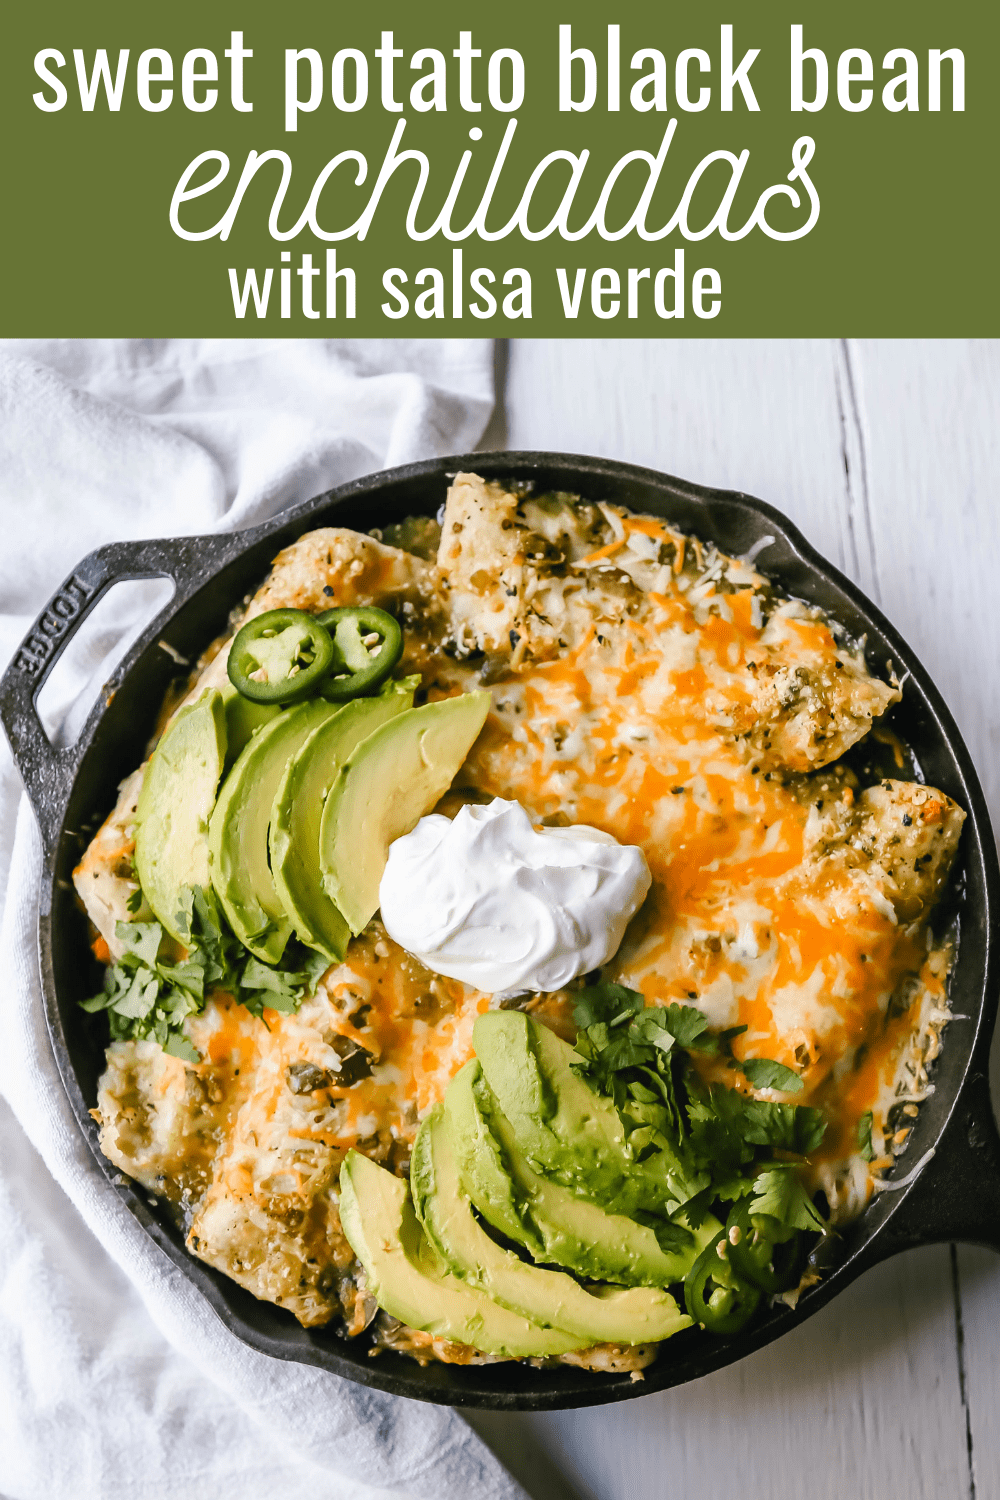 Sweet Potato Black Bean Enchiladas with Salsa Verde  Black beans, sweet potatoes, and roasted poblano chilies rolled into corn tortillas and topped with salsa verde and Mexican cheeses. www.modernhoney.com #vegetableenchiladas #enchiladas